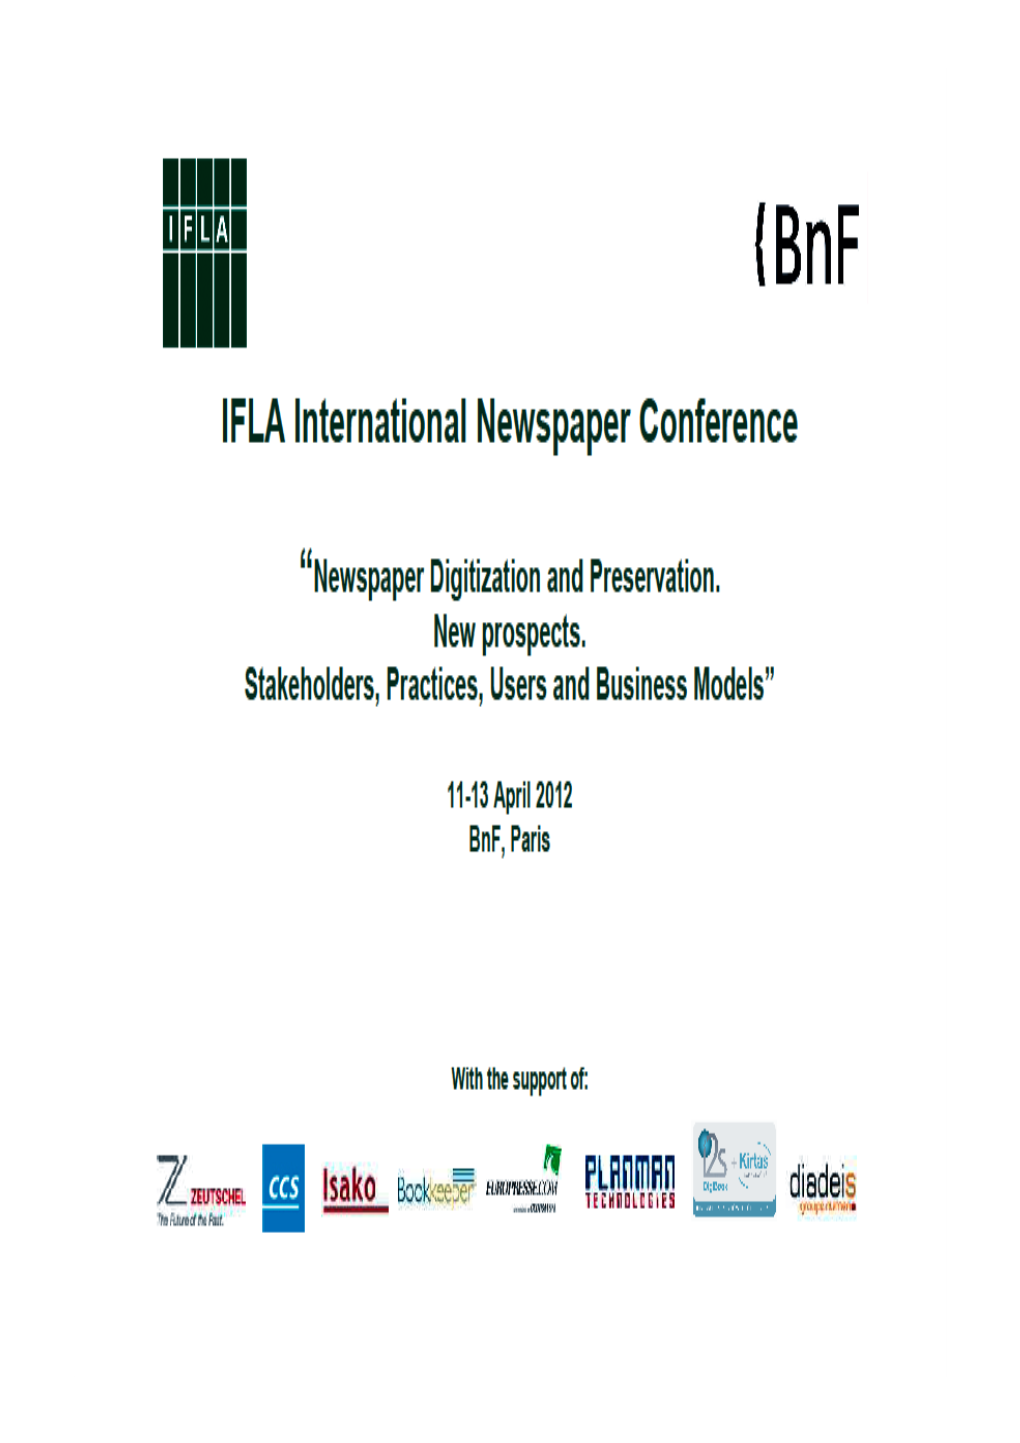 Conférence IFLA PAC/Newspapers Section – Bnf Paris, Bnf, 11 – 13 Avril 2012 I